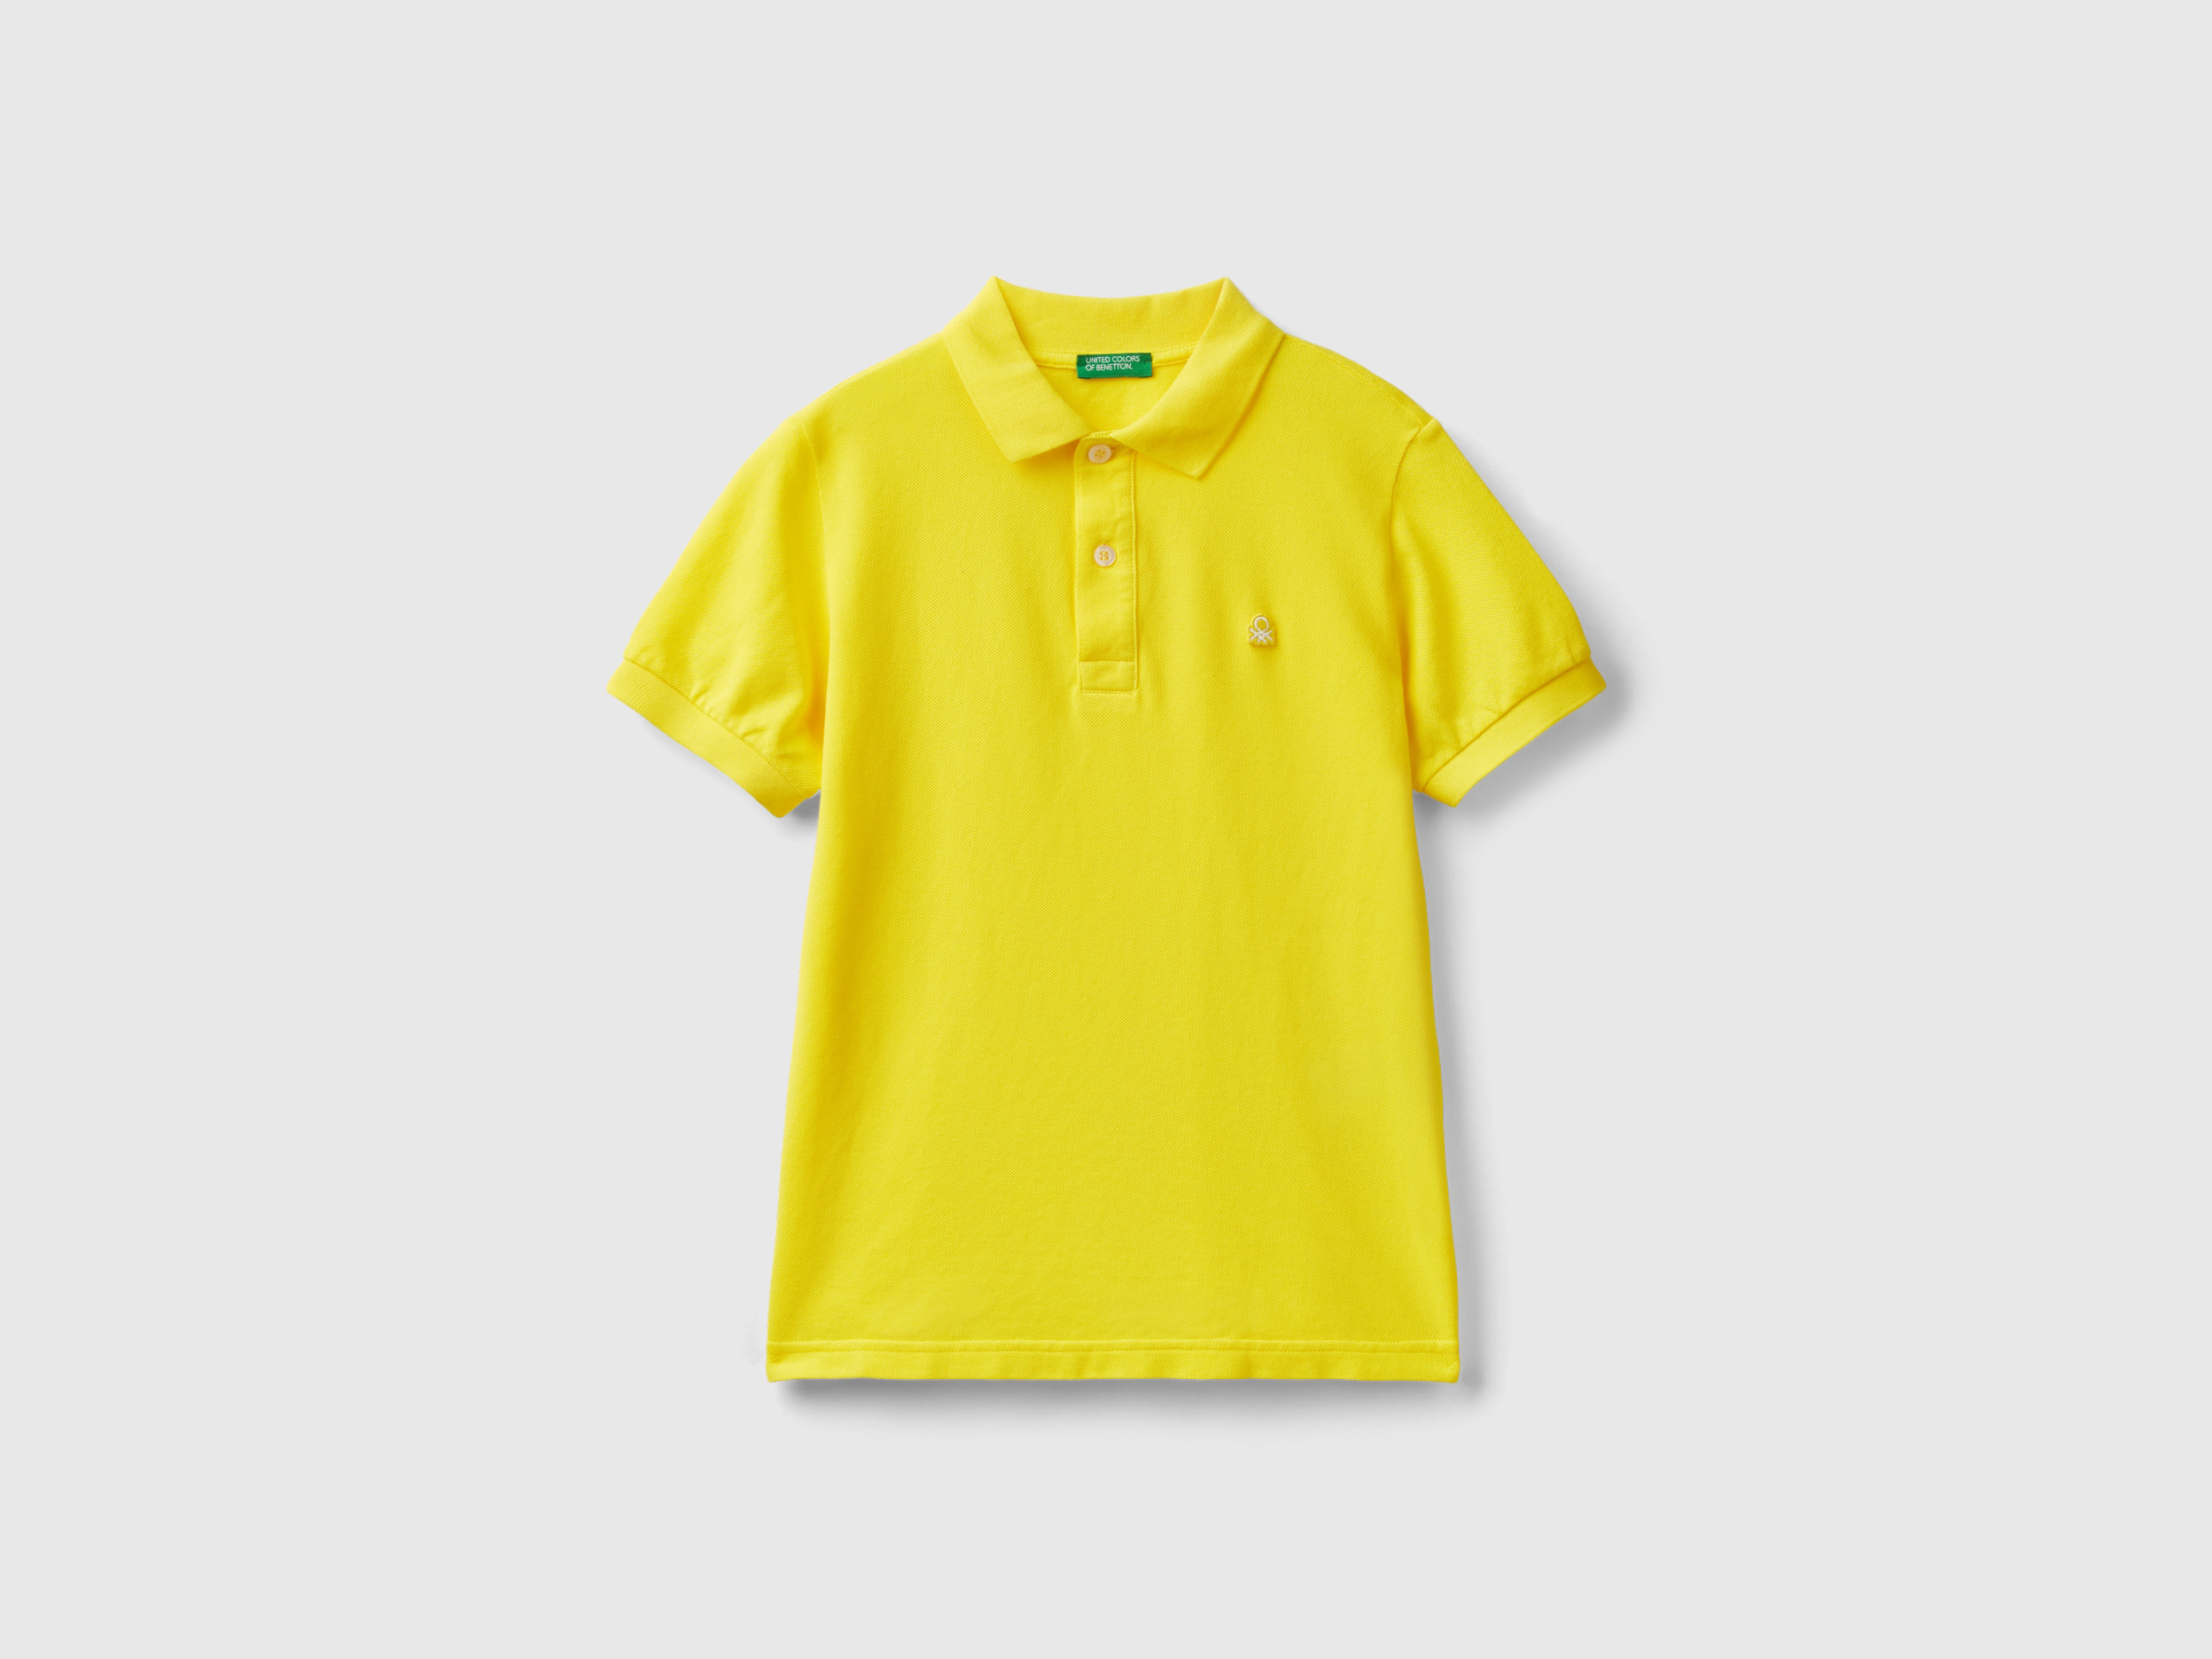 Image of Benetton, Slim Fit Polo In 100% Organic Cotton, size M, Yellow, Kids